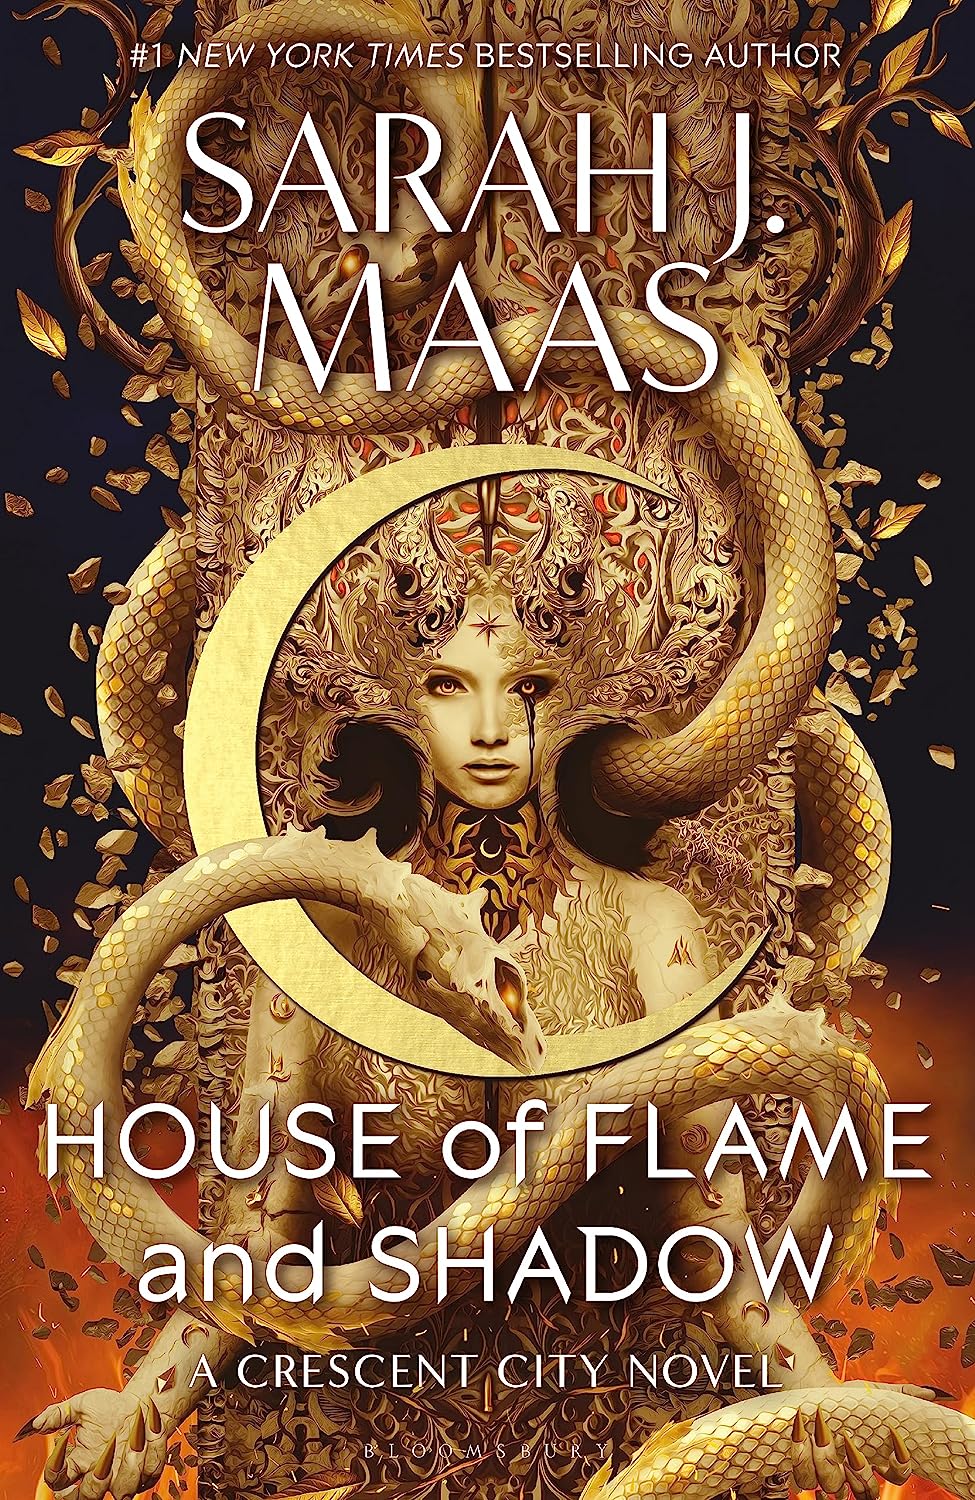 ‘House of Flame and Shadow’ shot to the top of the bestseller charts